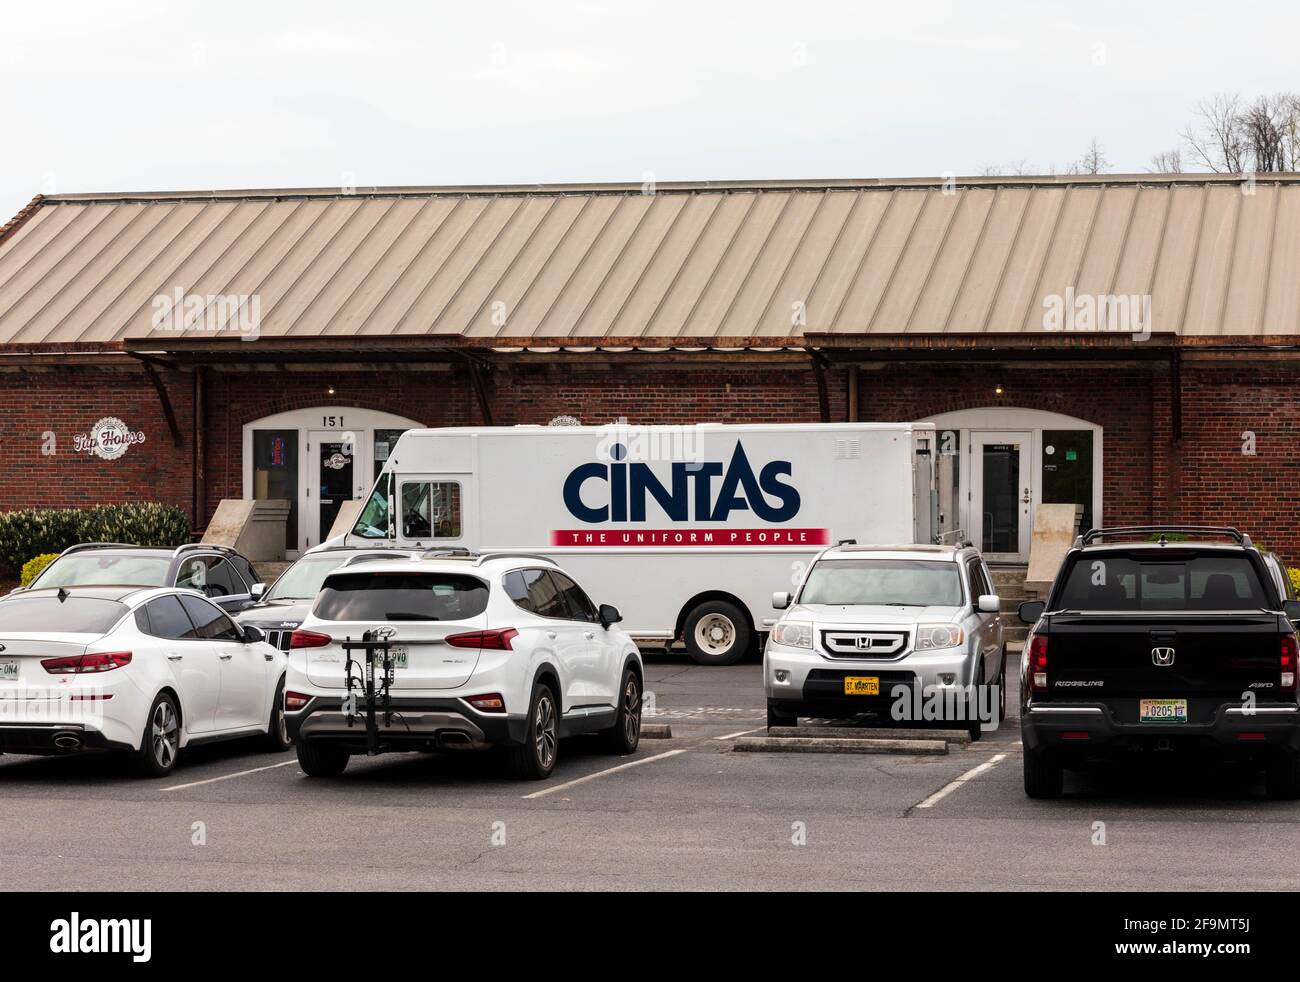 KINGSPORT, TN, USA--8 APRIL 2021: A Cintas truck, "the Uniform people", making a delivery. Stock Photo